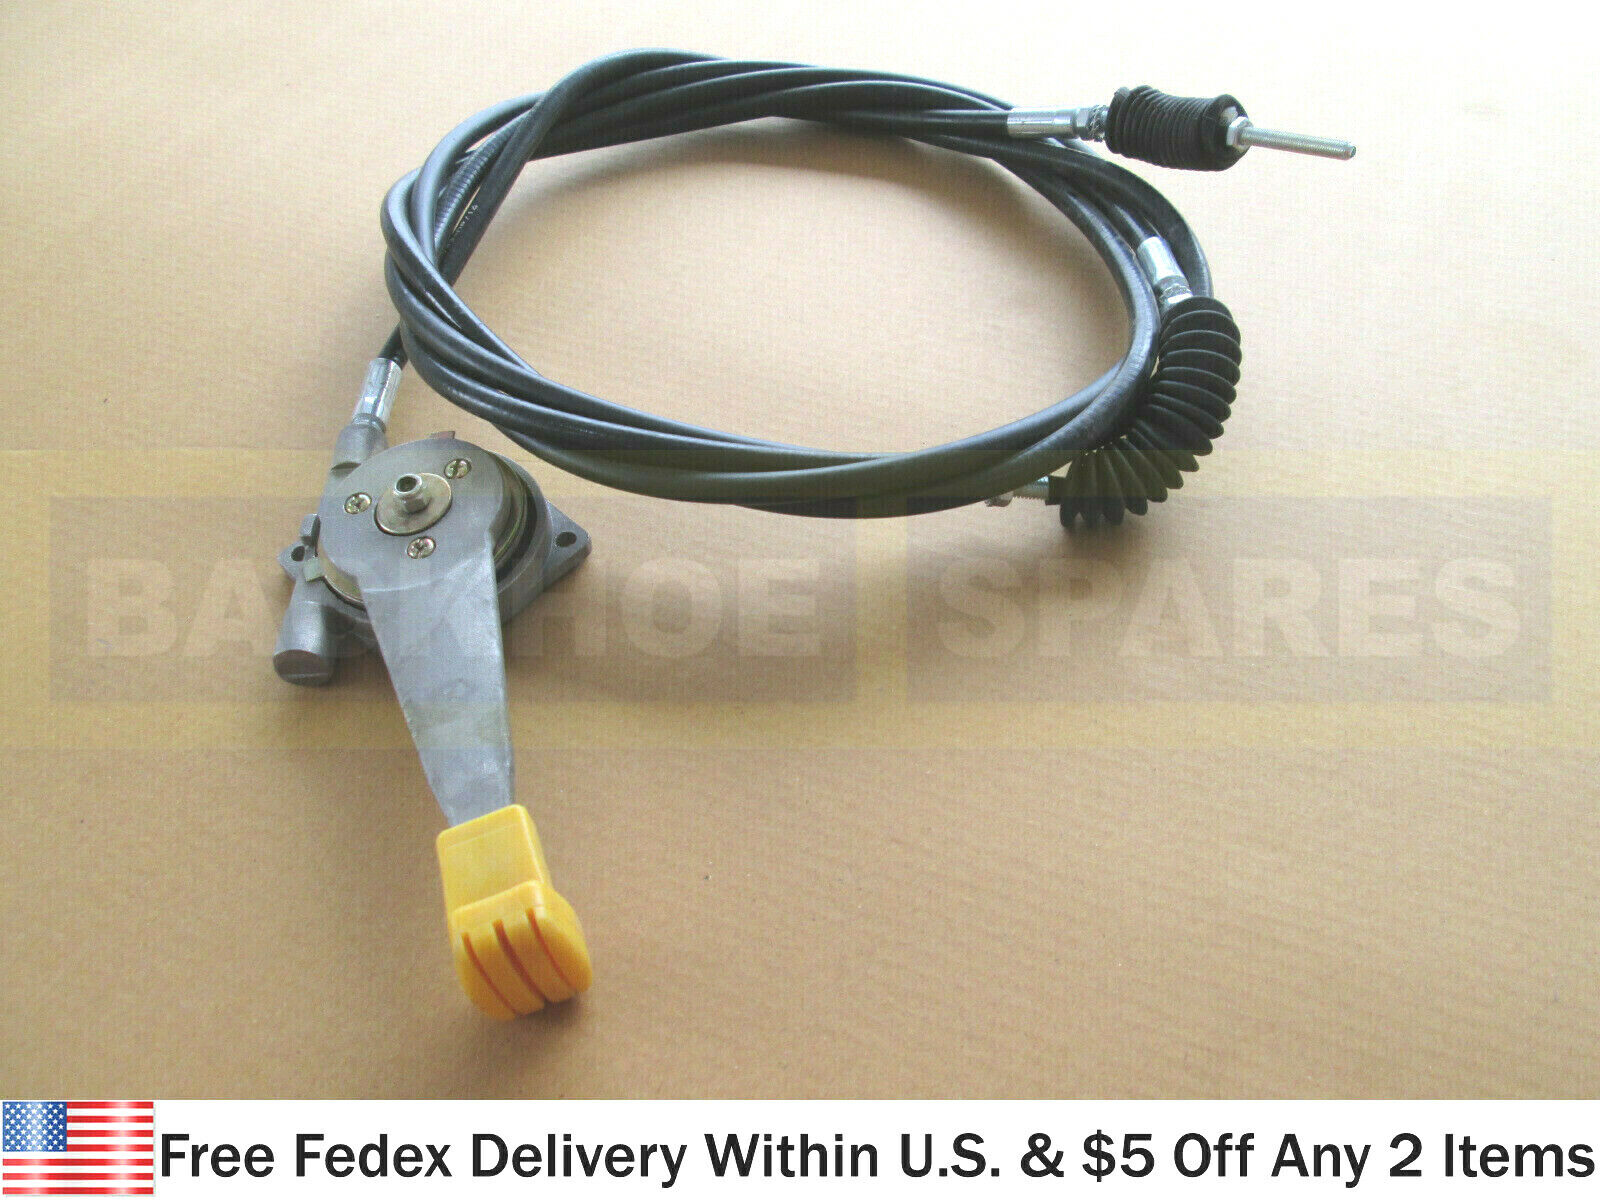 JCB PARTS - THROTTLE CABLE ASSY. WITH LEVER (PART NO. 910/48800)